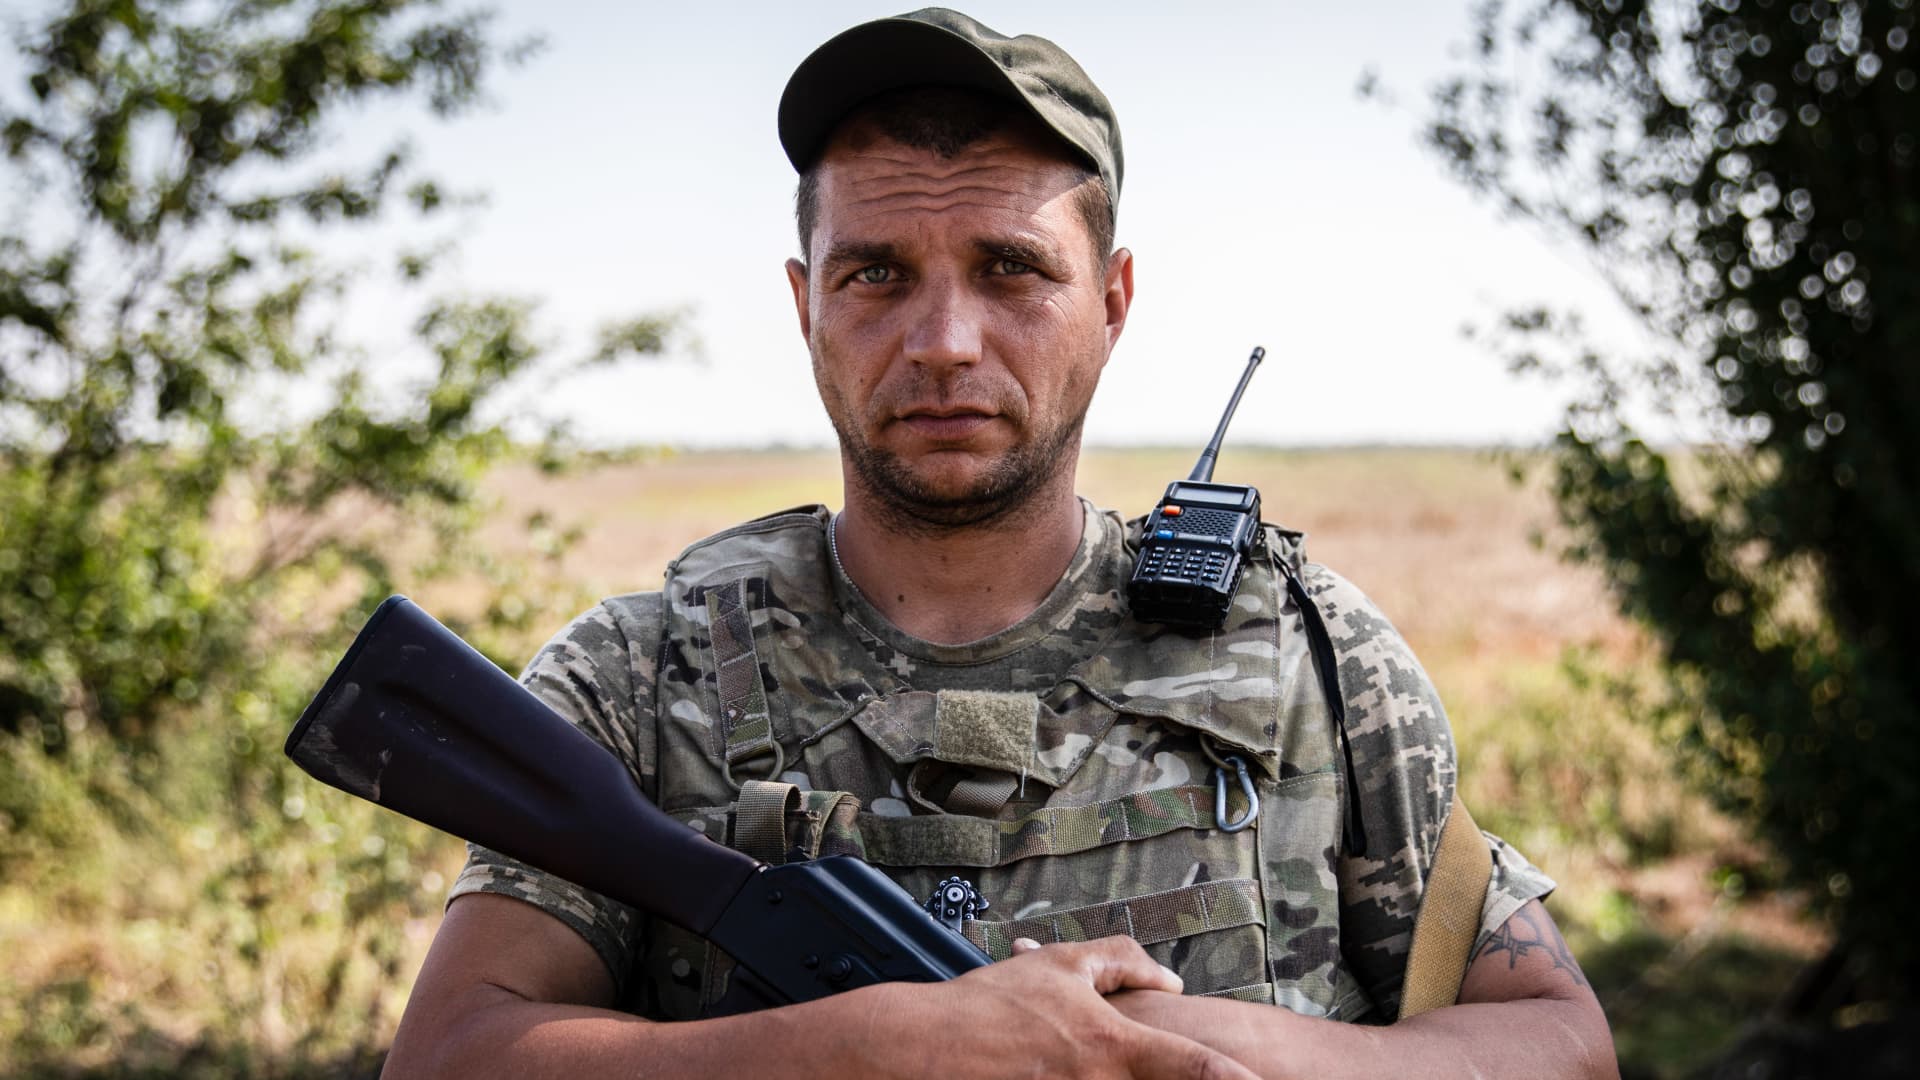 Kyiv claims Russian forces are starting to retreat as counteroffensive begins; ‘we will chase them to the border’ Zelenskyy says – CNBC